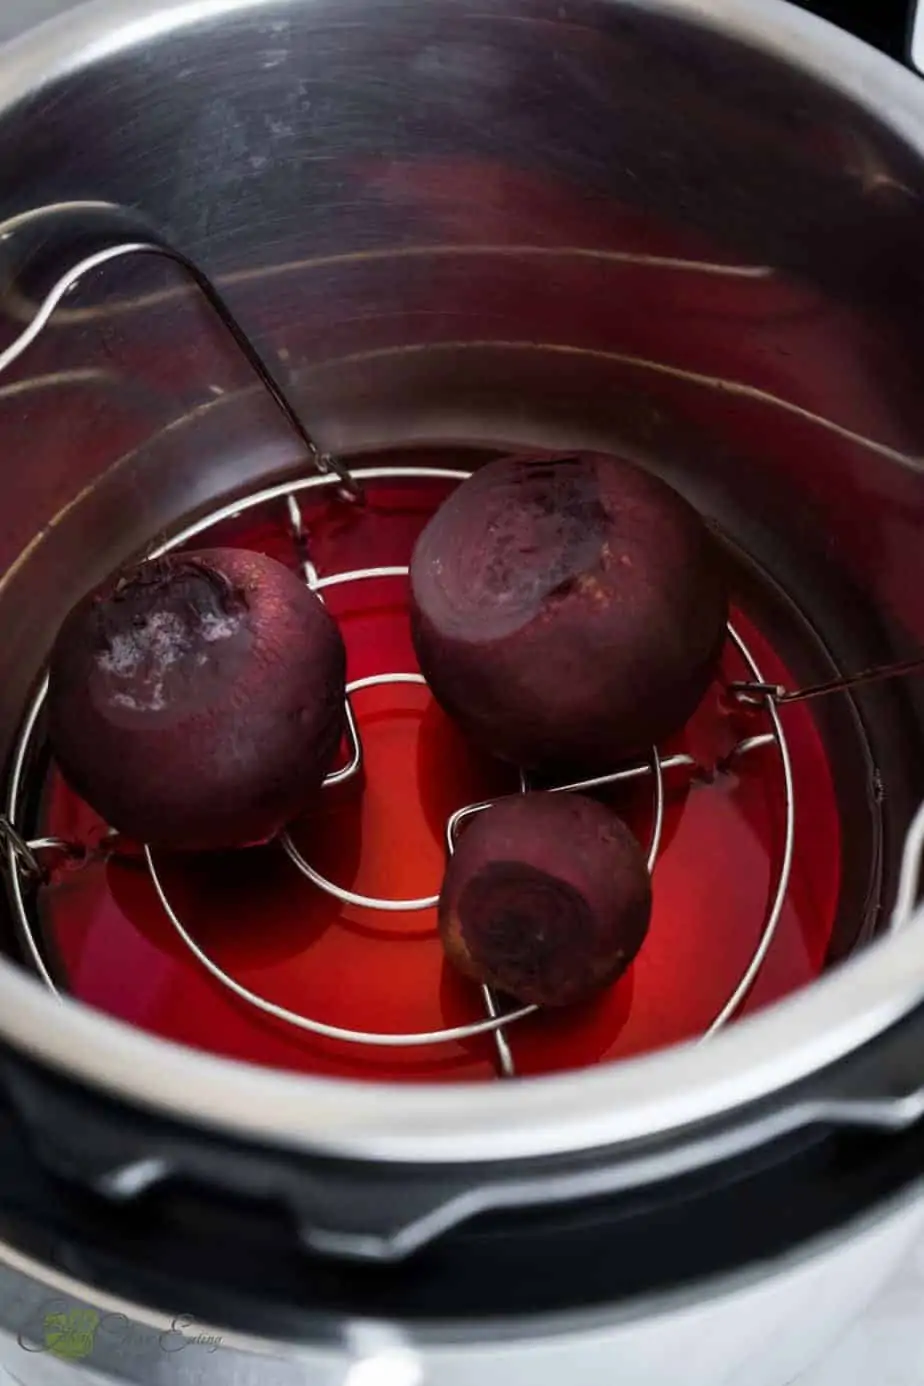 beets inside the instant pot after pressure cooking them, the water is stained with red color.